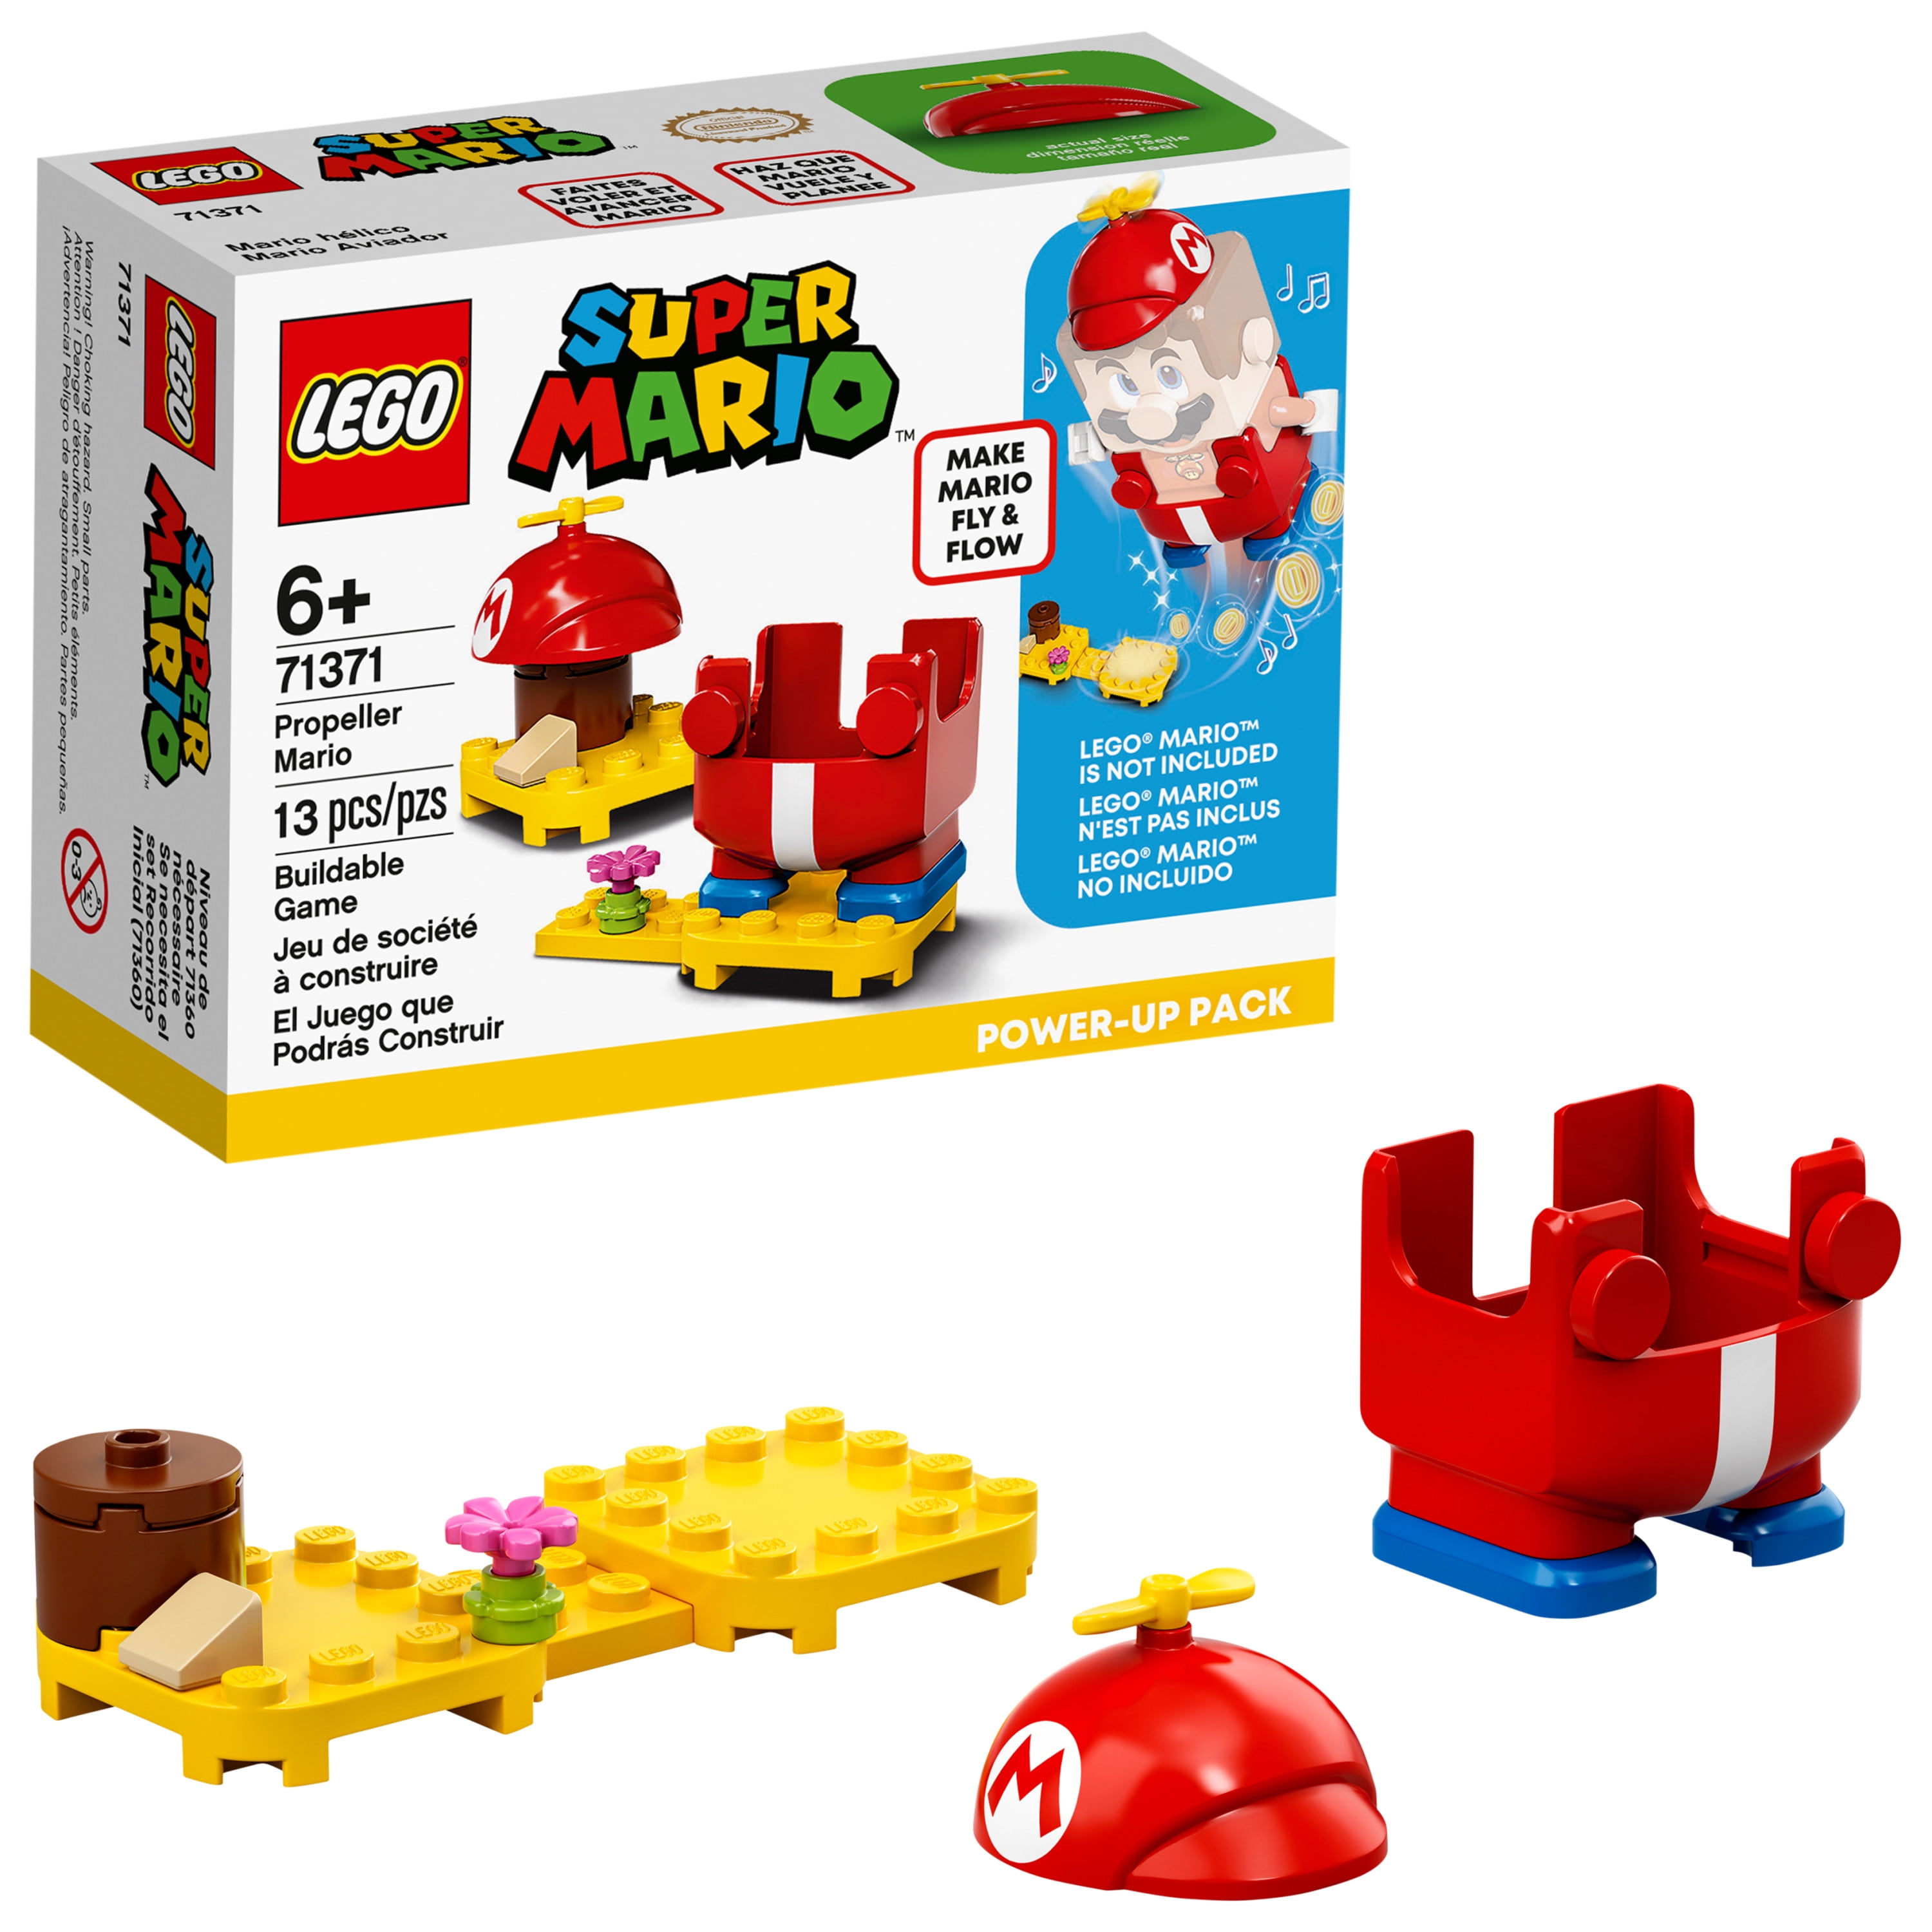 71373 LEGO Builder Mario Power-Up Pack Super Mario for sale online